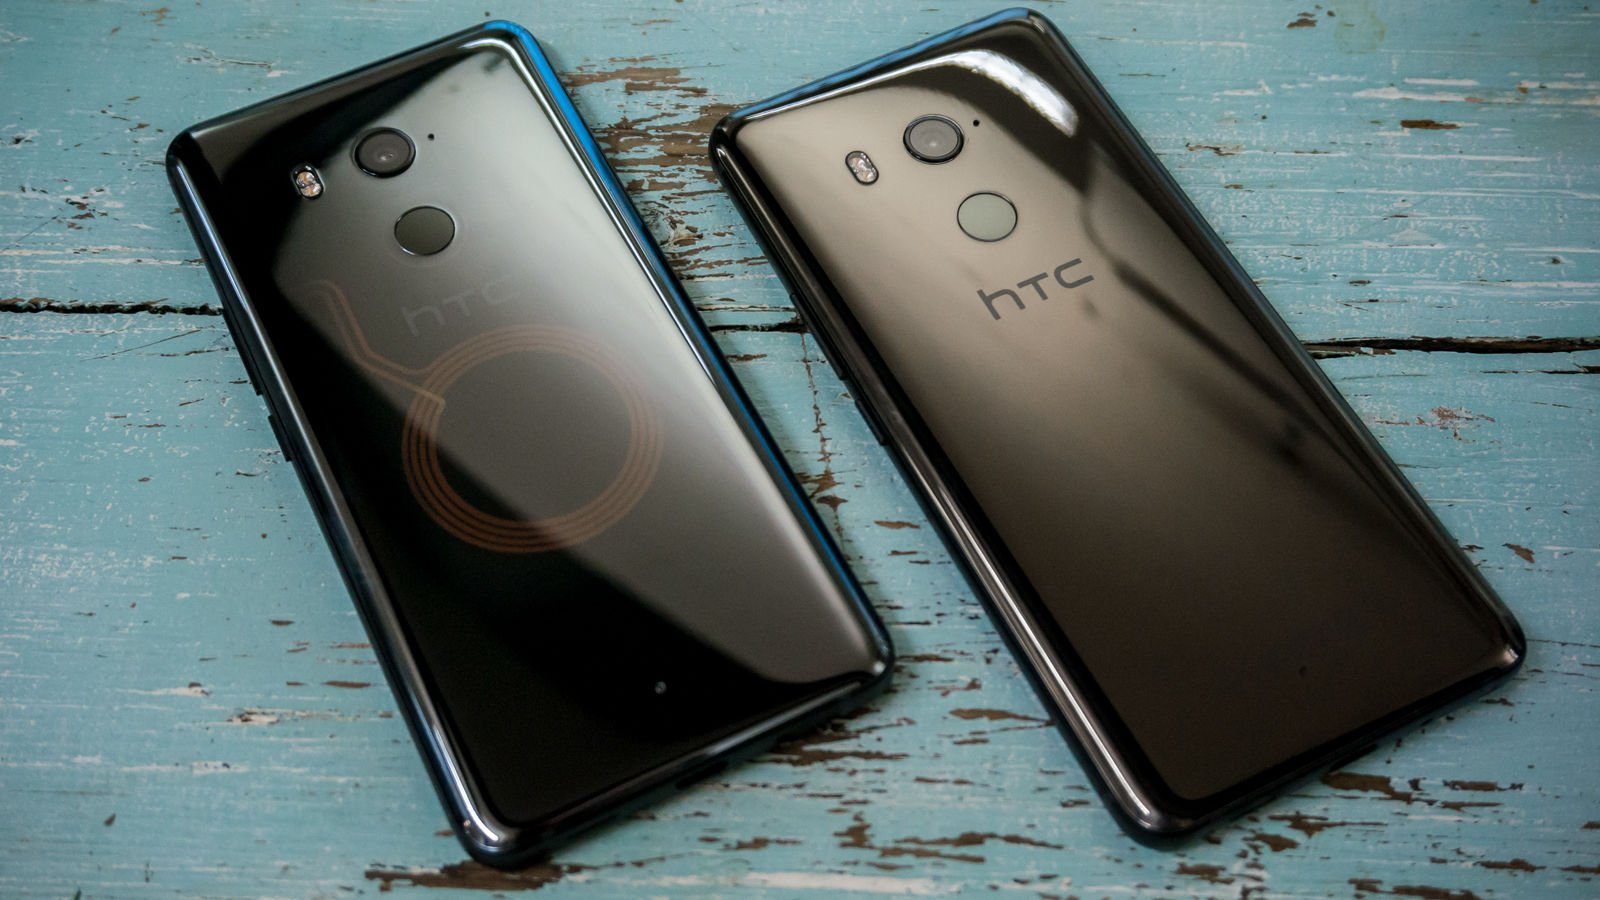 How to Root HTC U11+ with Magisk without TWRP